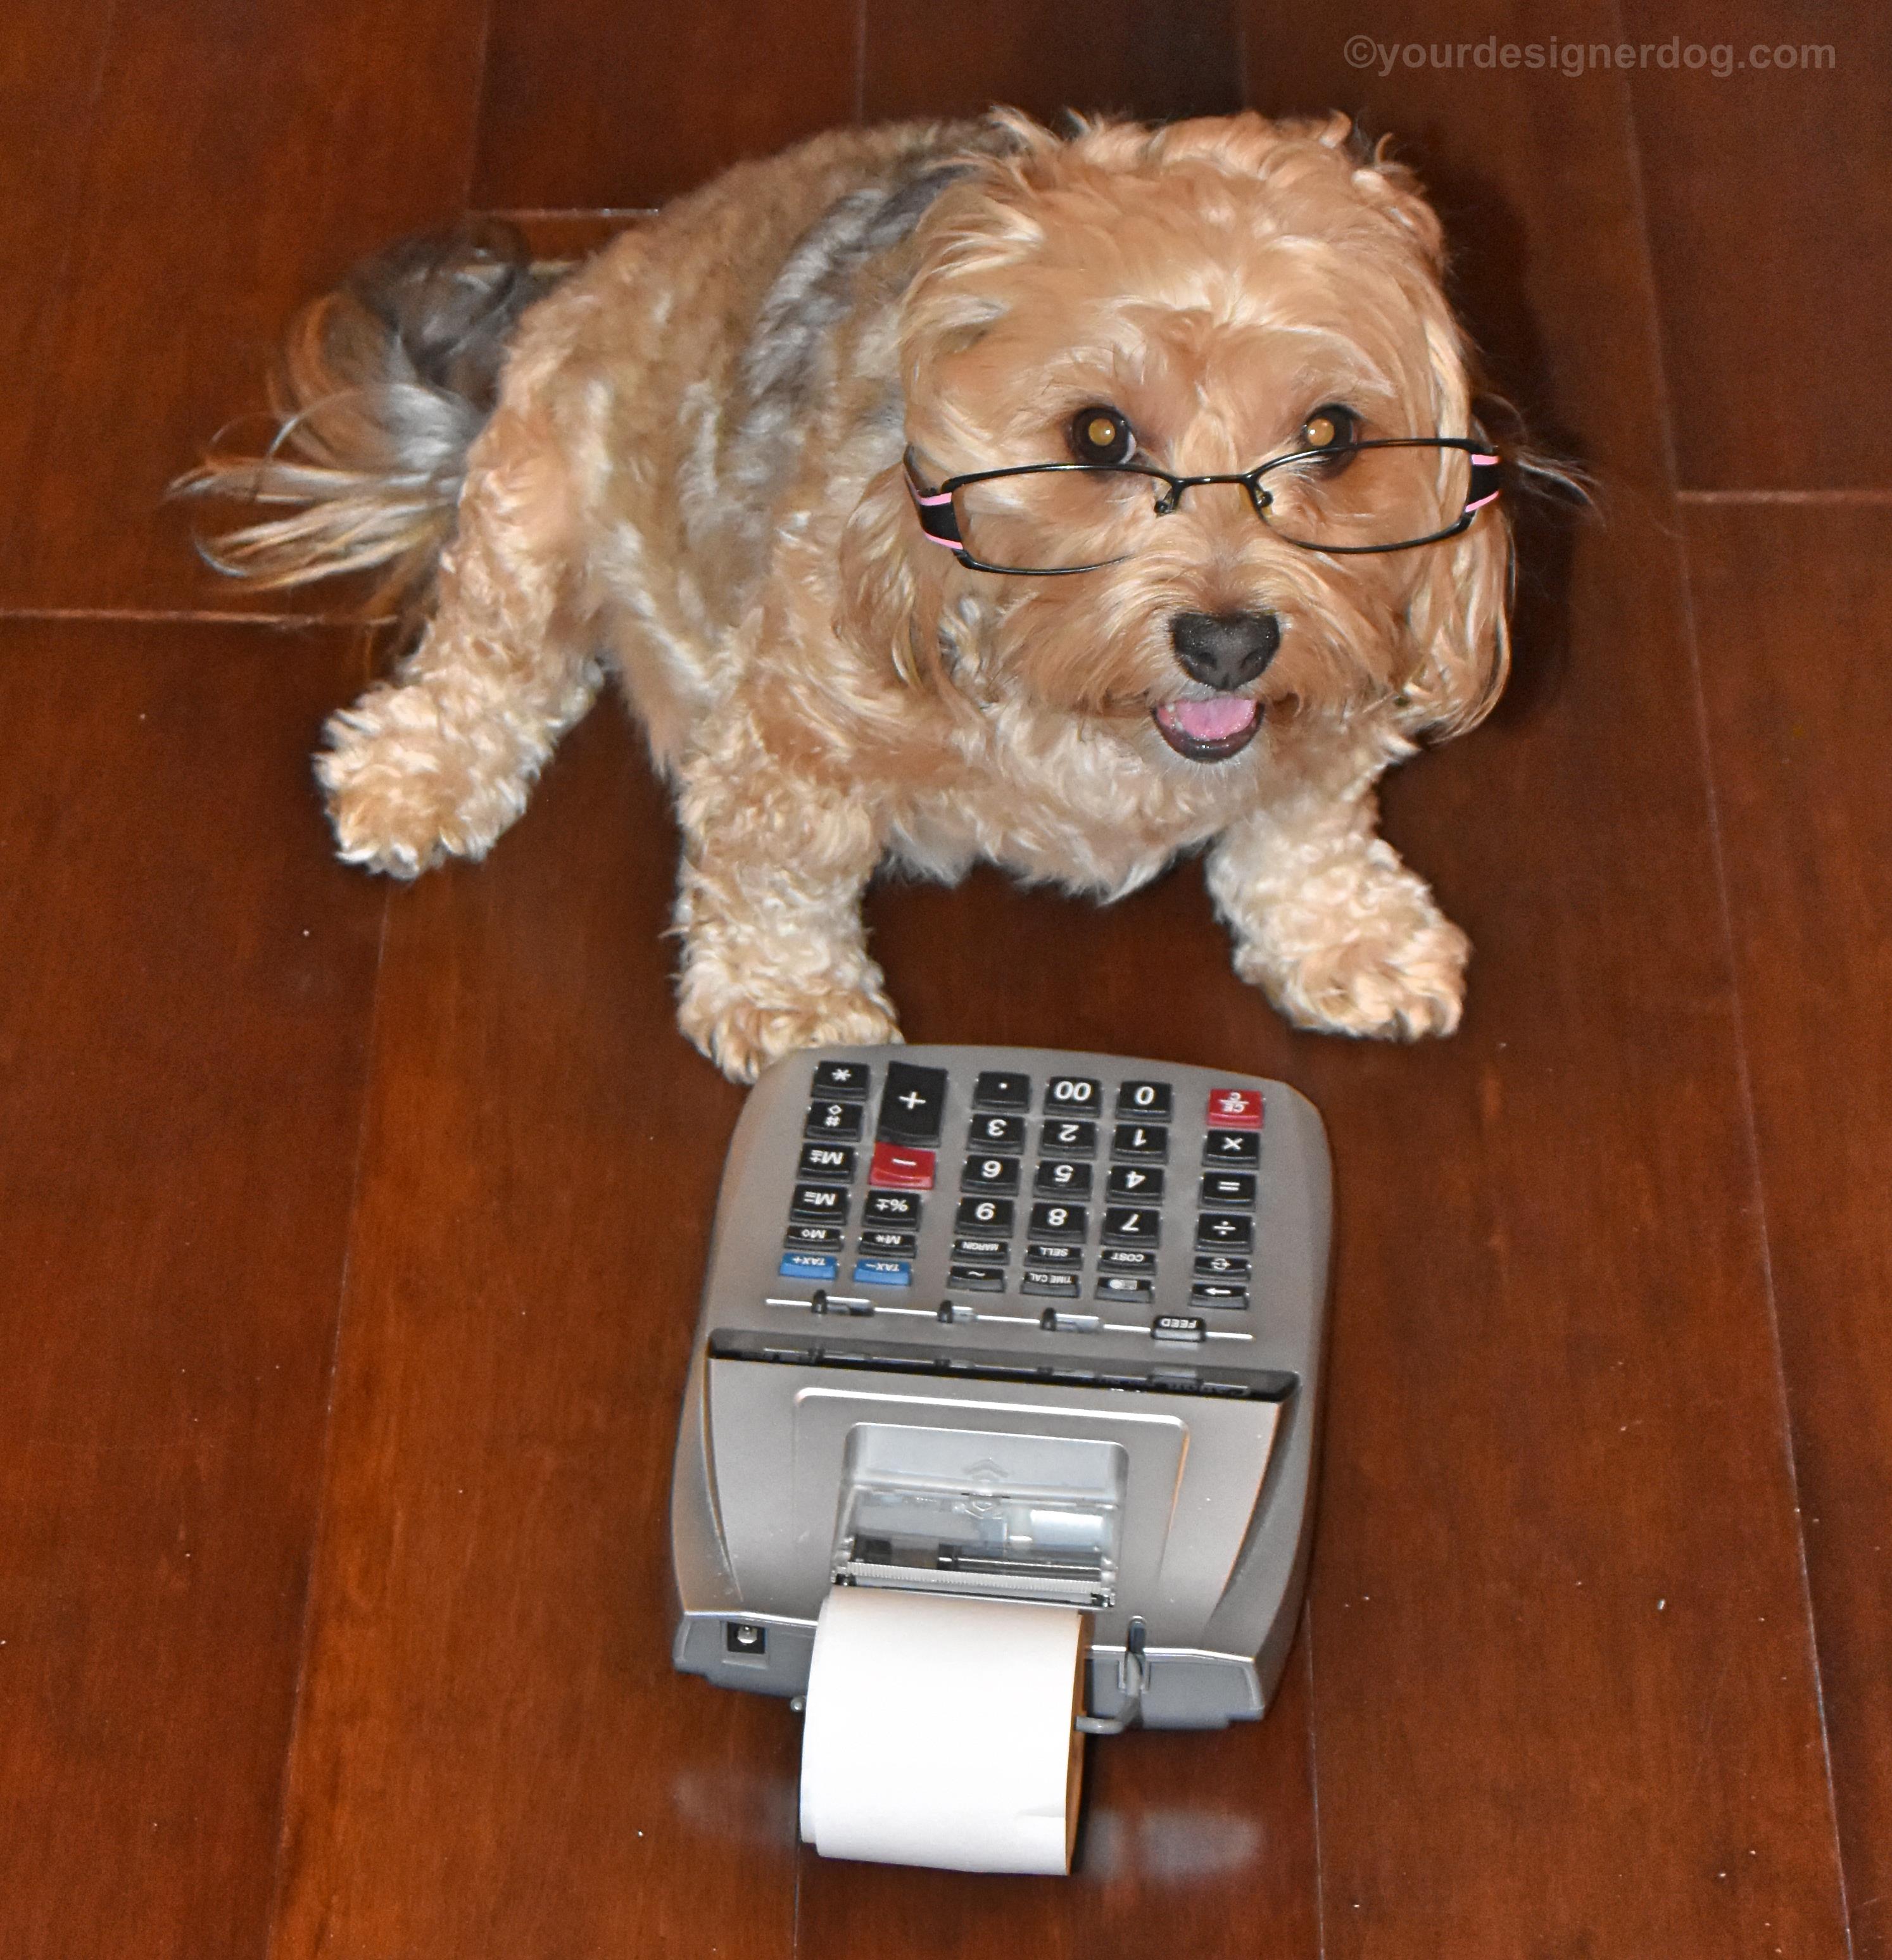 dogs, designer dogs, Yorkipoo, yorkie poo, taxes, dog wearing glasses, tongue out, adding machine